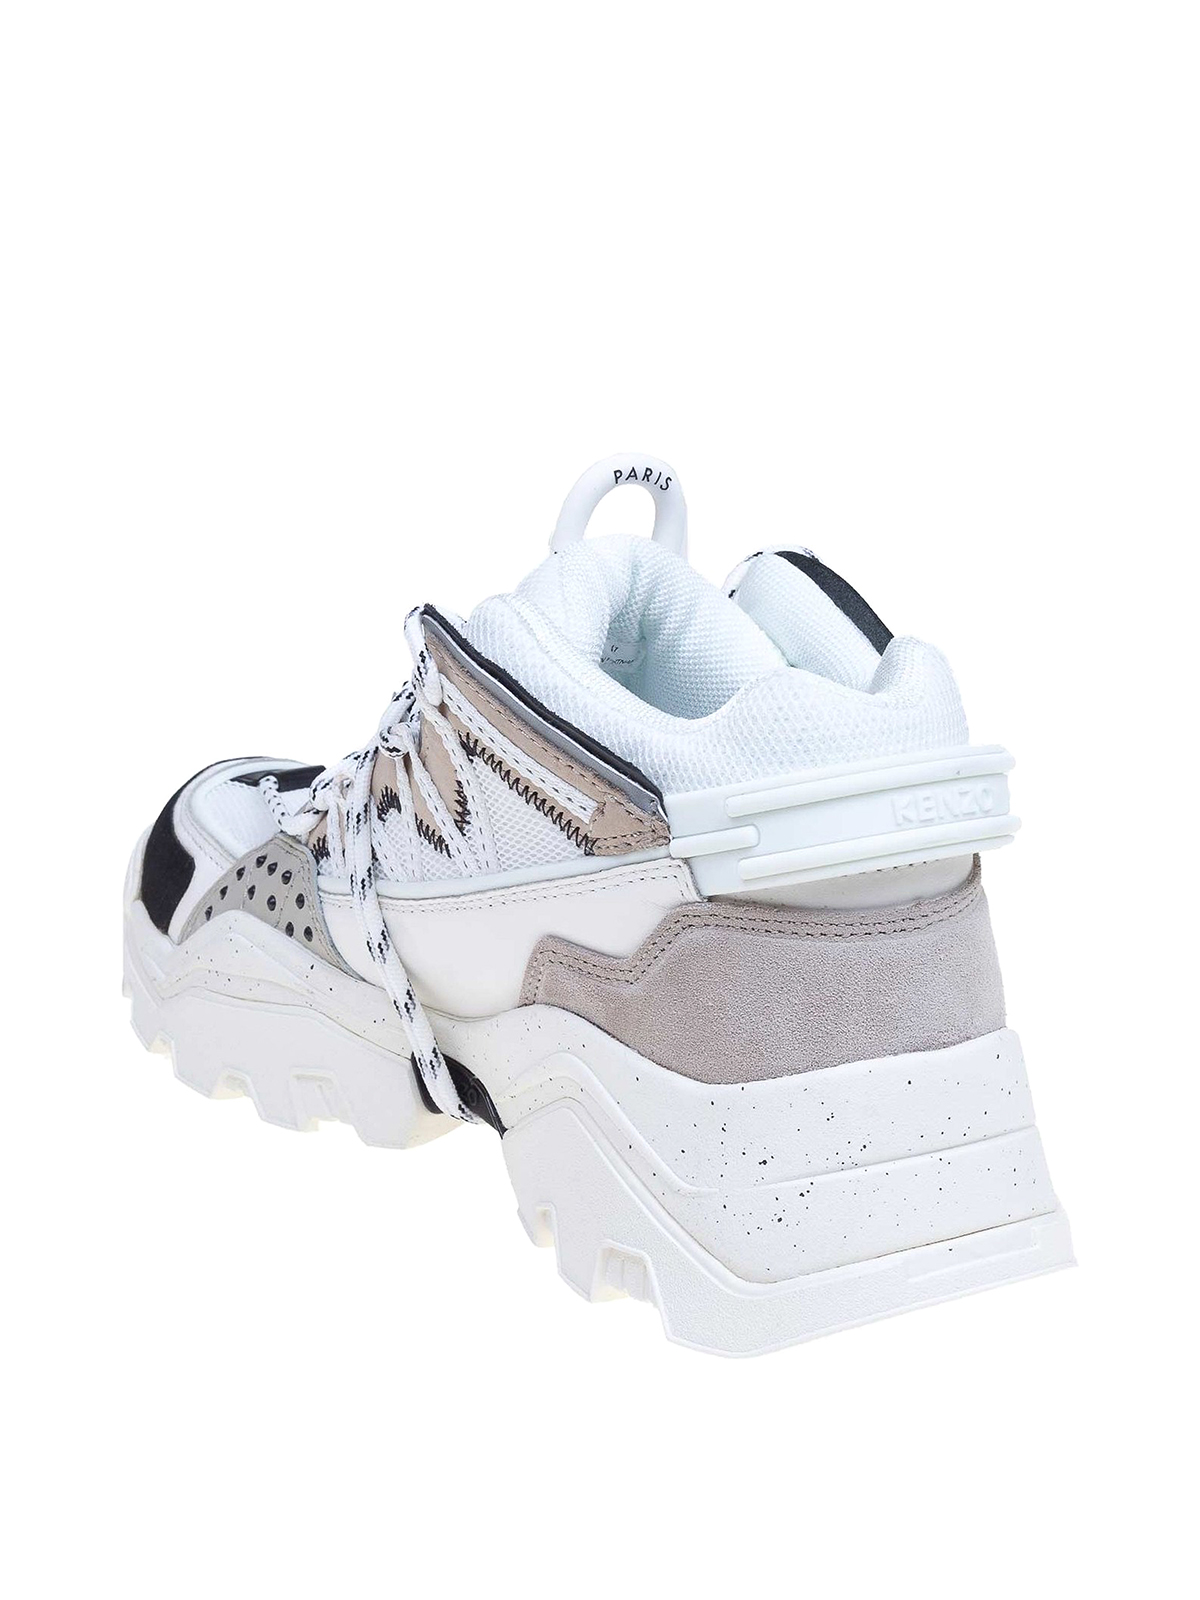 Trainers Kenzo - Inka mixed material sneakers - F965SN300L6993 